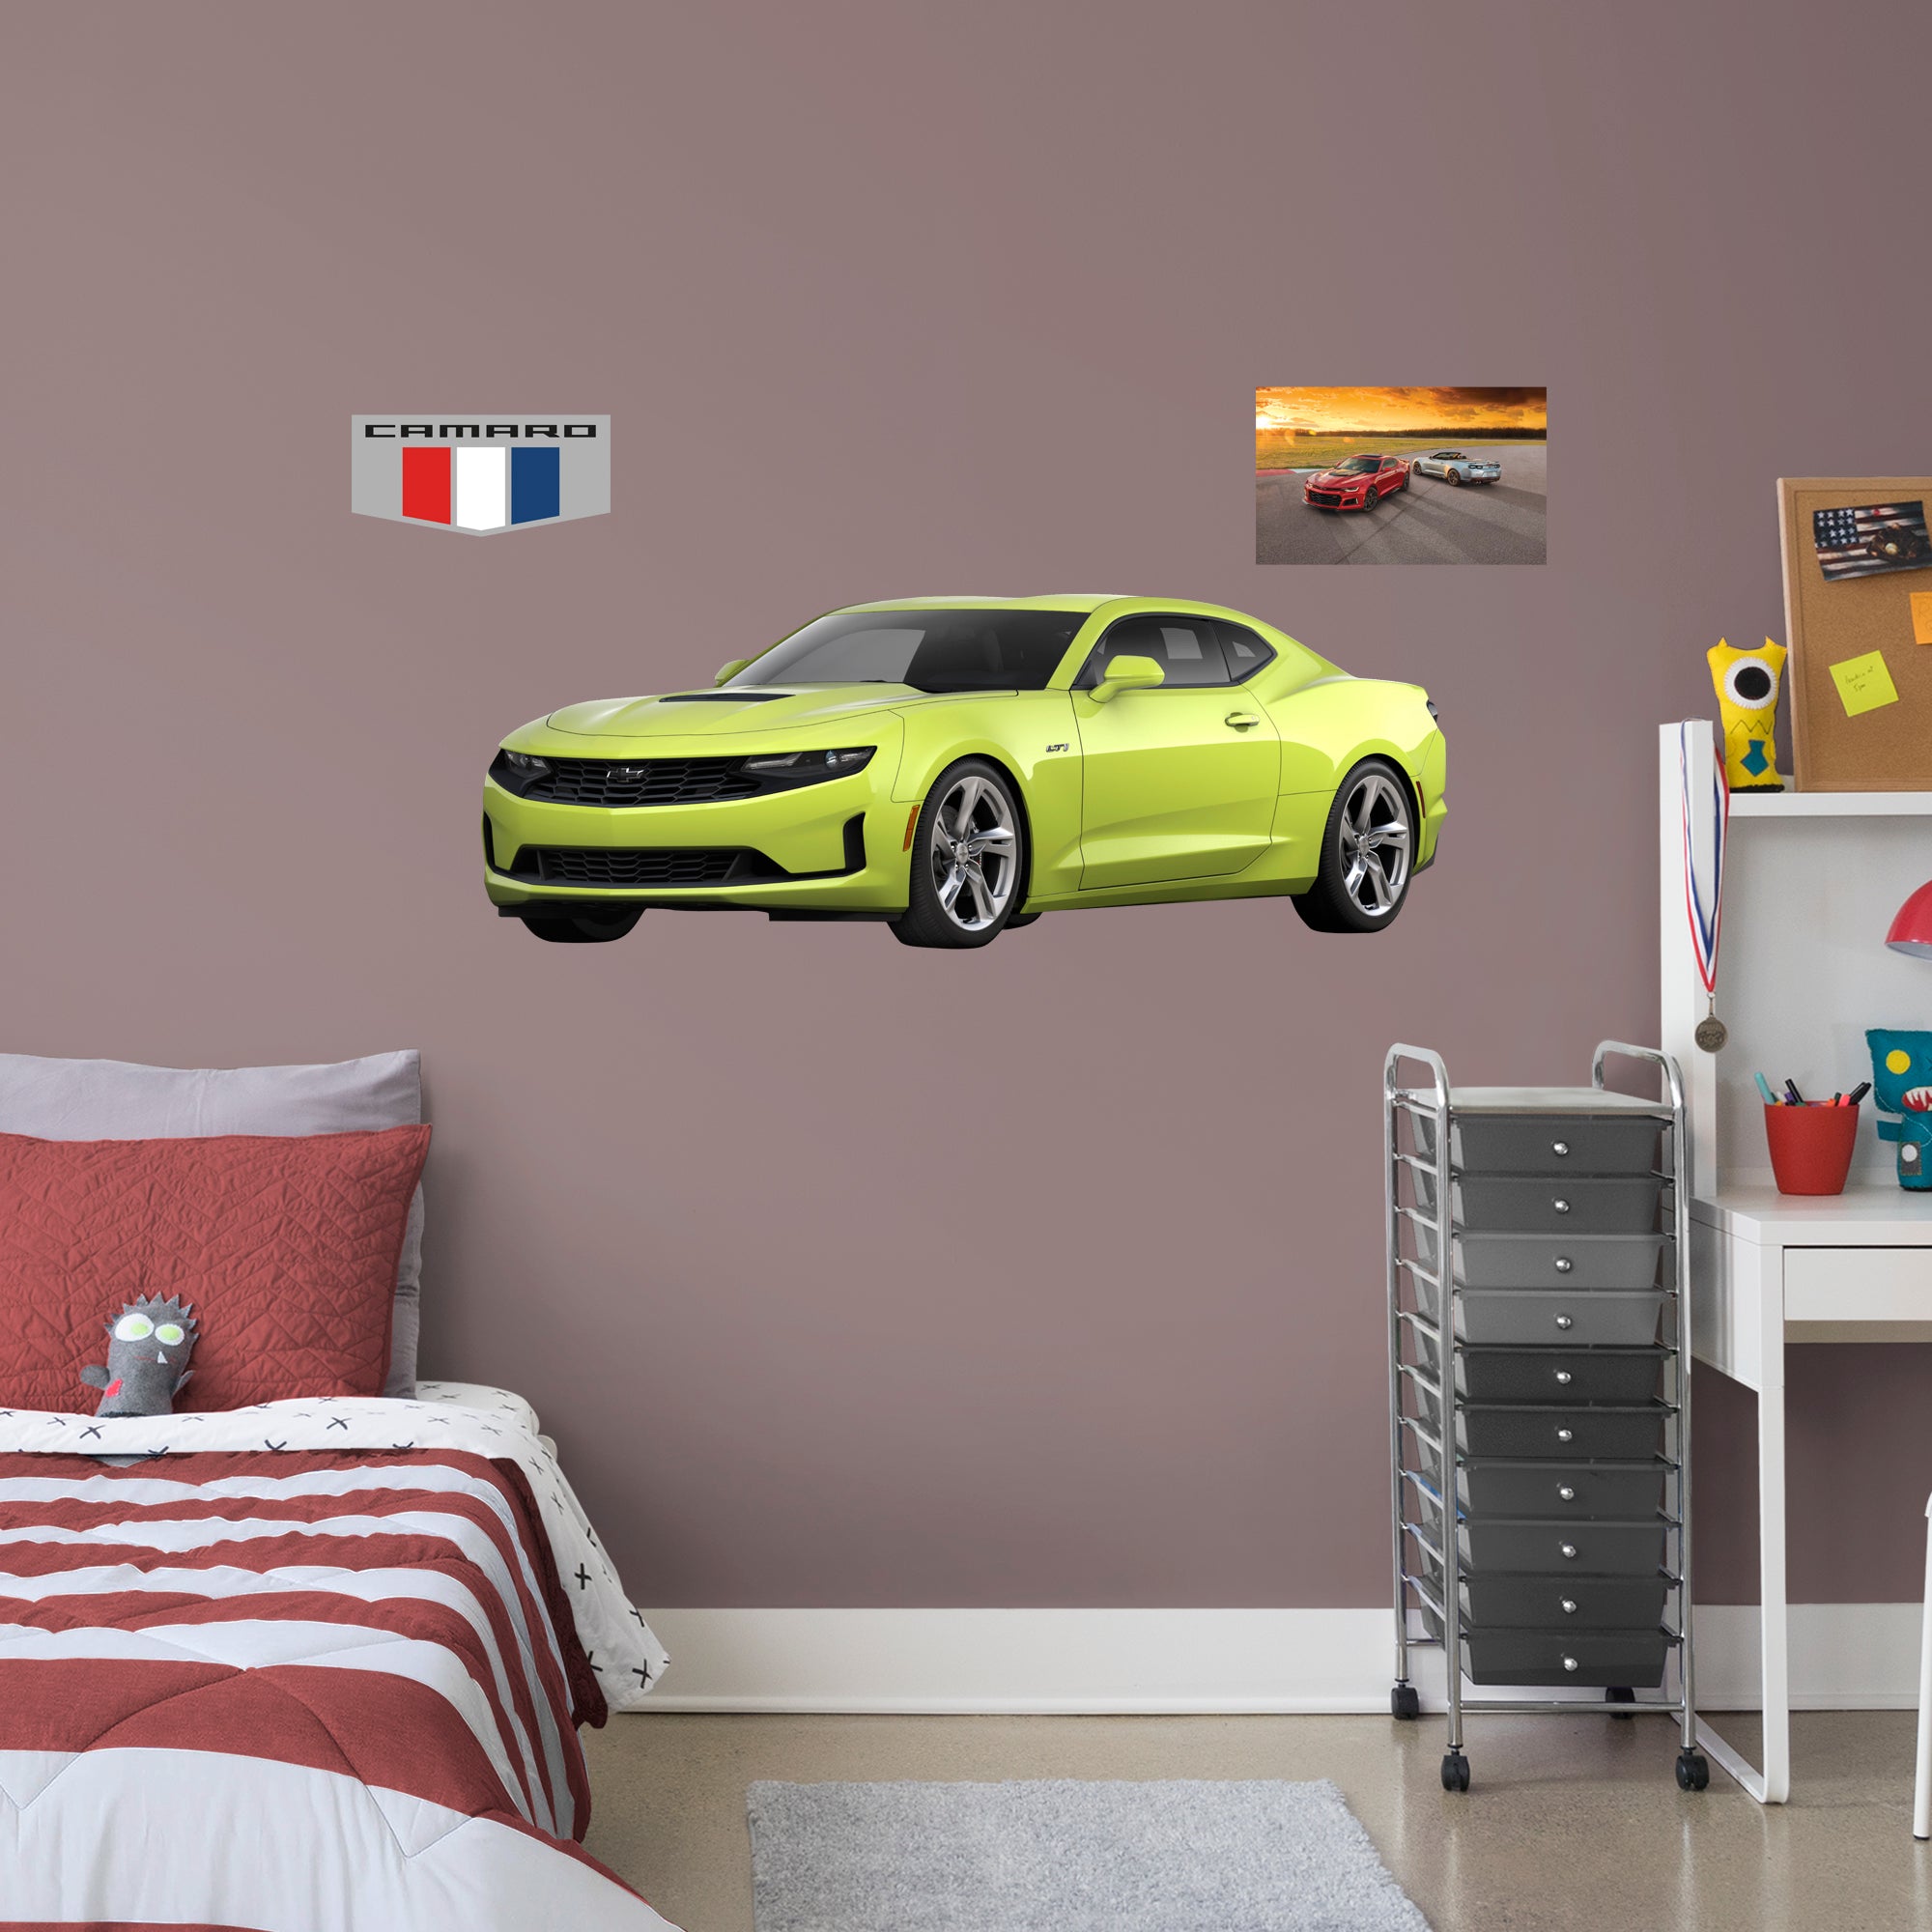 Chevrolet Yellow Camaro: Officially Licensed GM Removable Wall Decal Life-Size + 2 Decals by Fathead | Vinyl